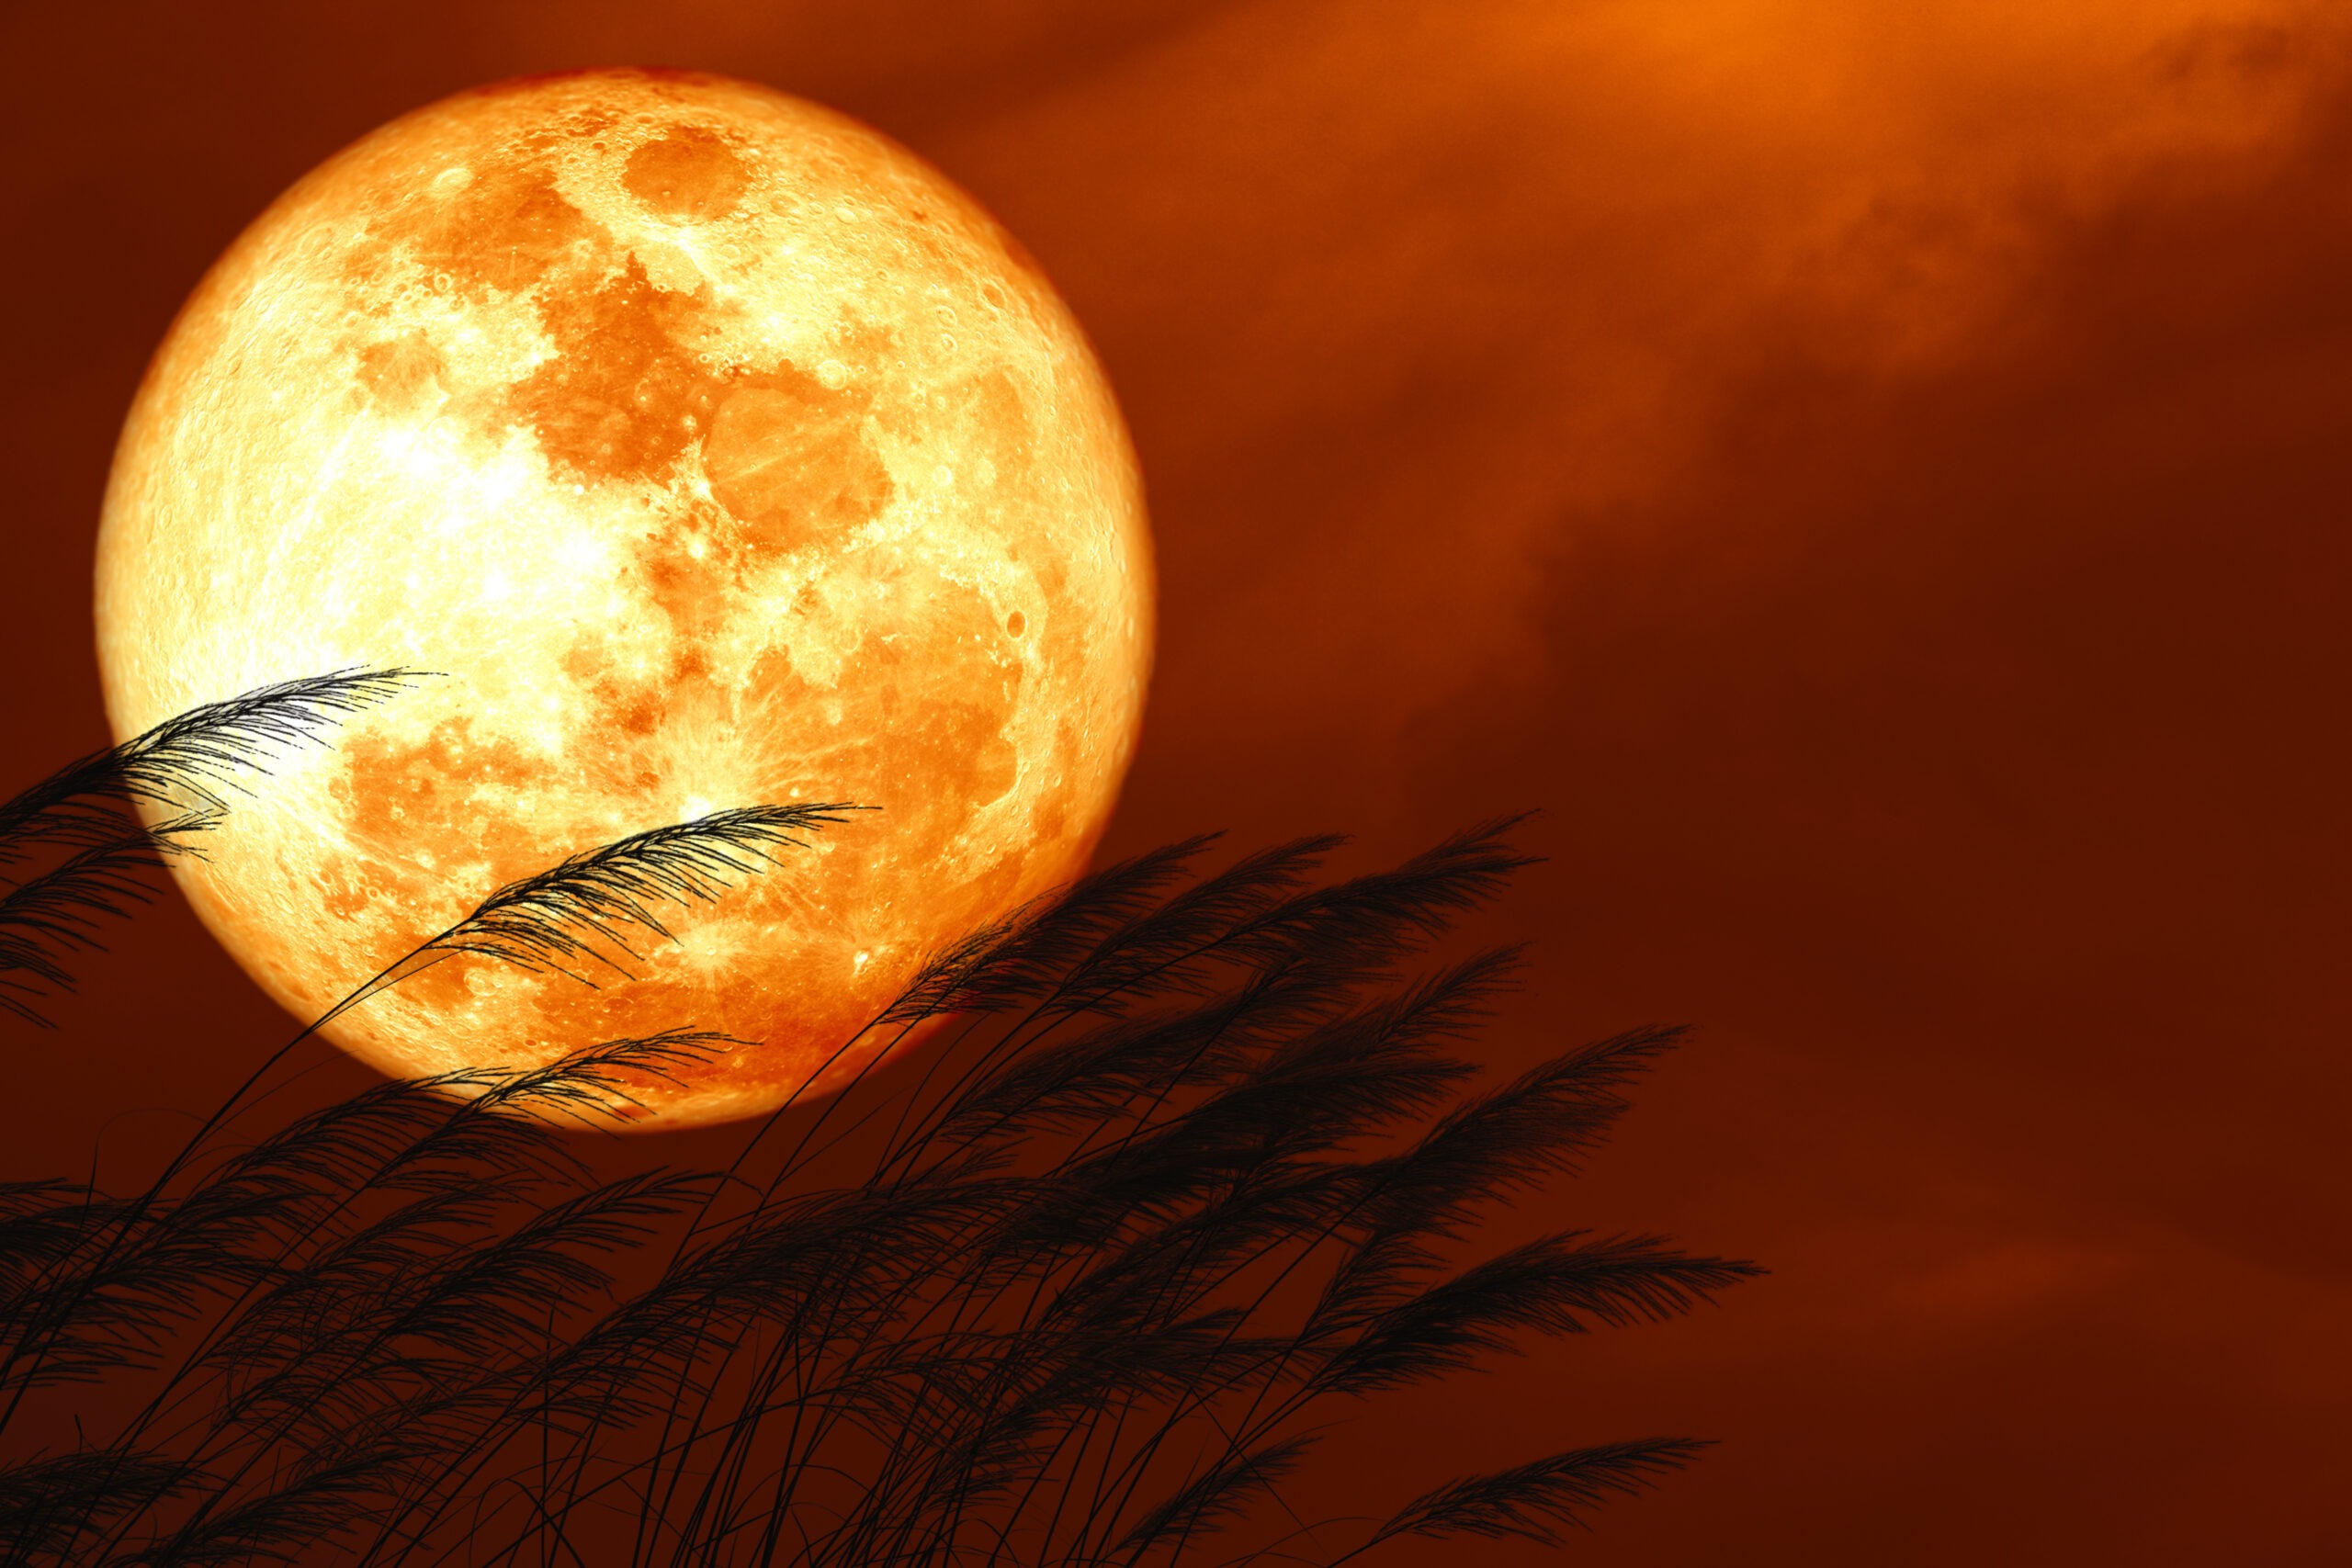 You’ll Be Able To See A Full Corn Moon Tonight. Here’s How.